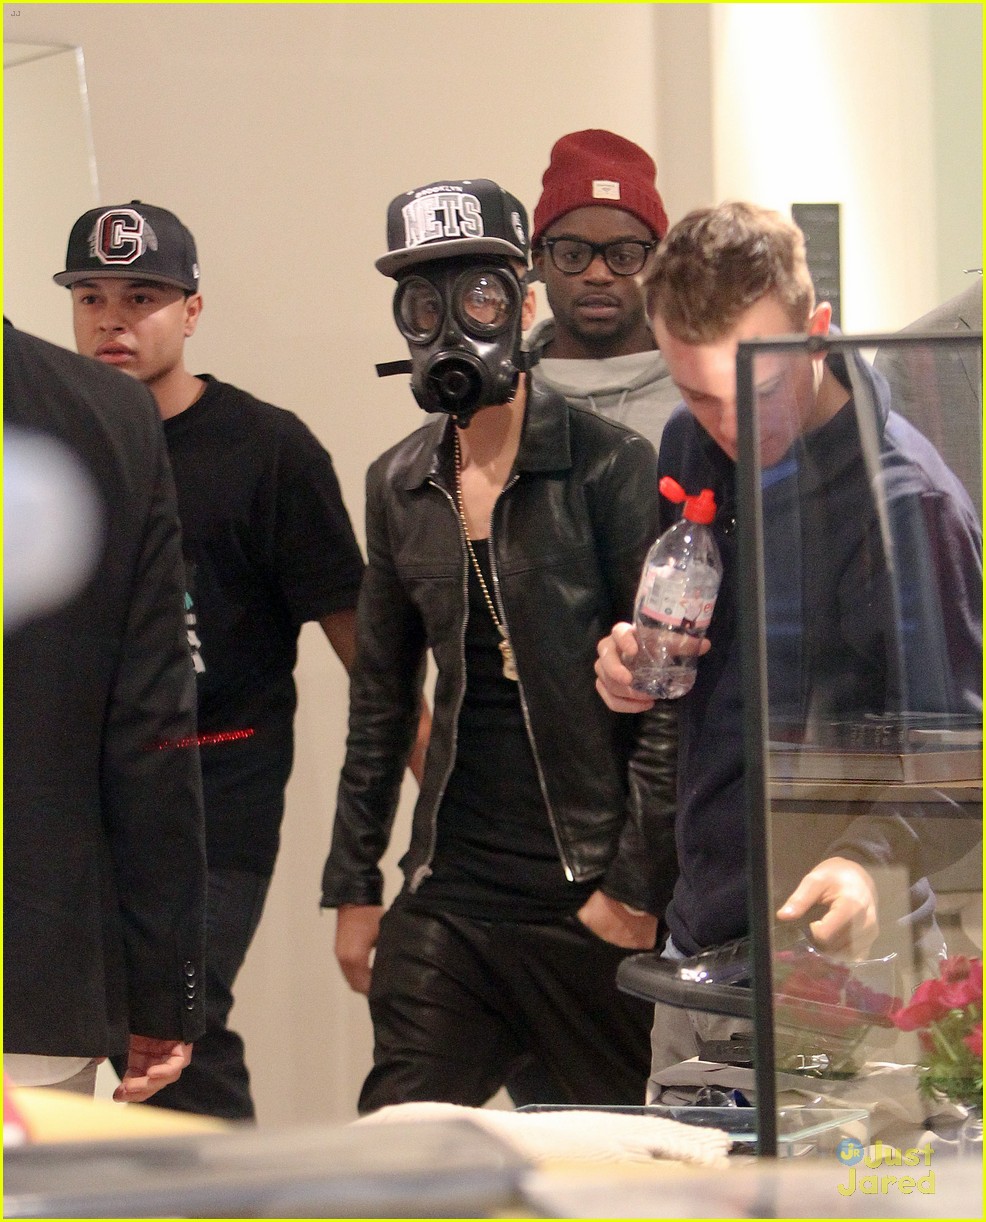 Justin Bieber Wears Gas Mask While Shopping Photo 541149 Photo Gallery Just Jared Jr